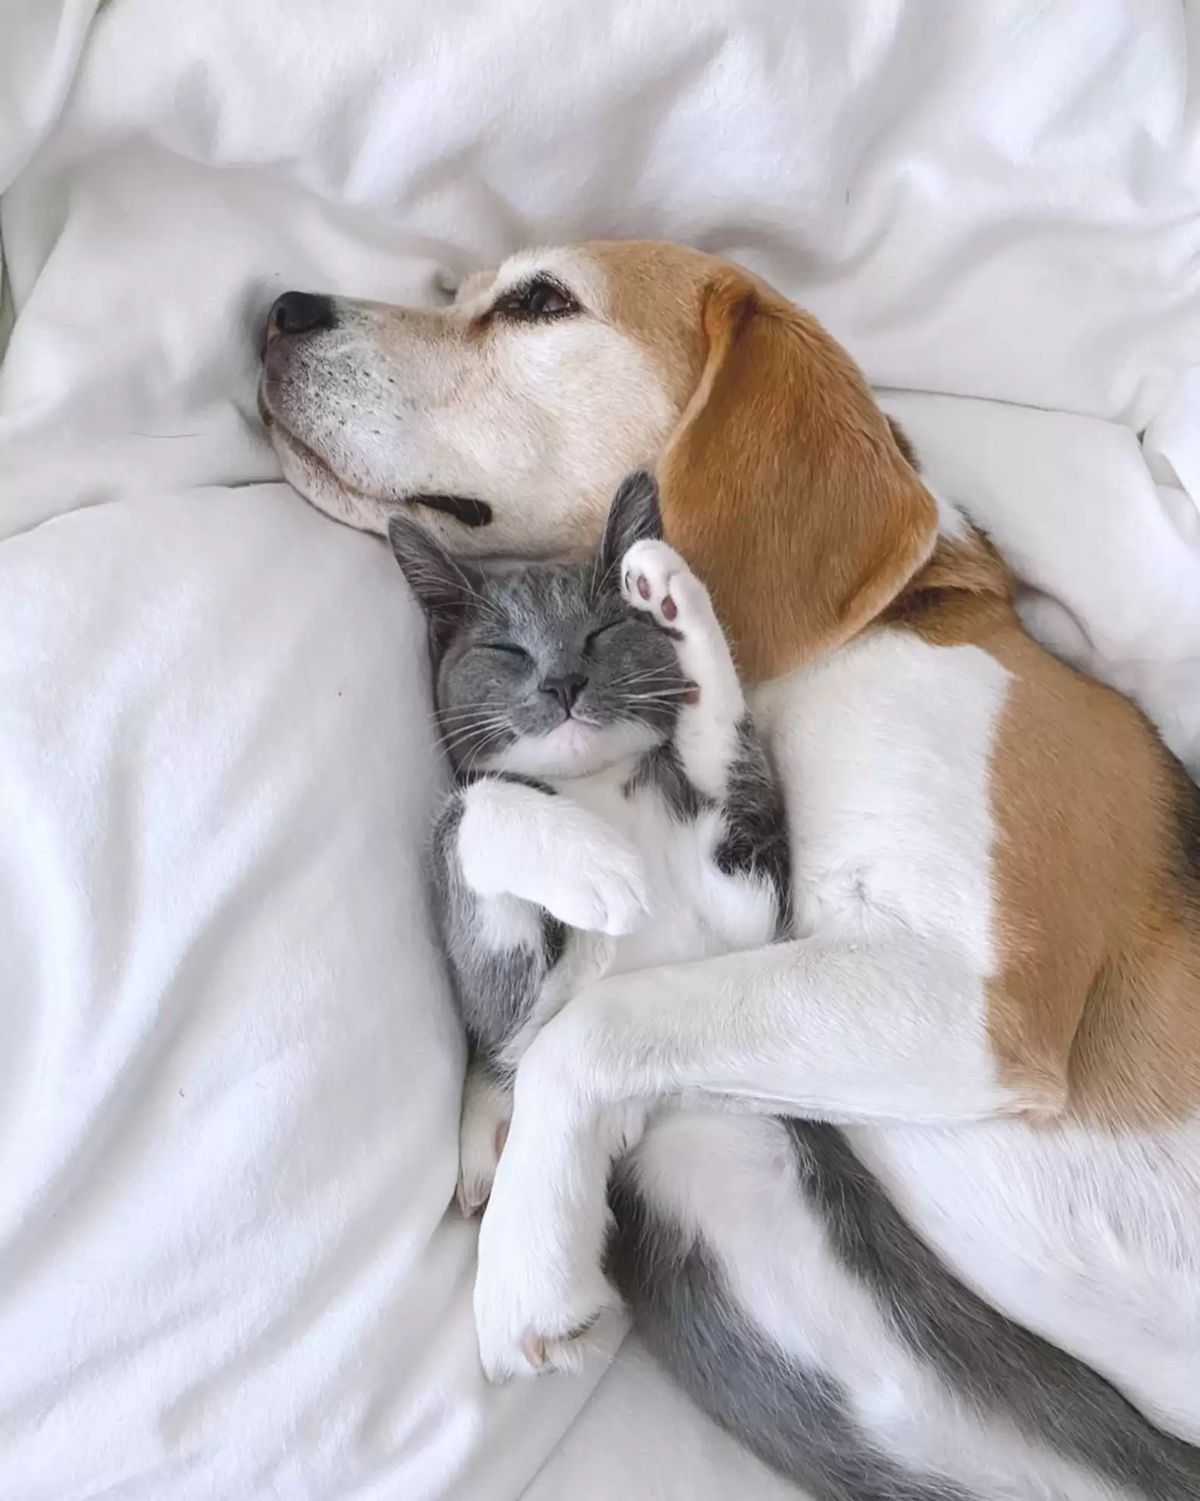 brown and white dog cuddling a grey and white kitten sleeping belly up